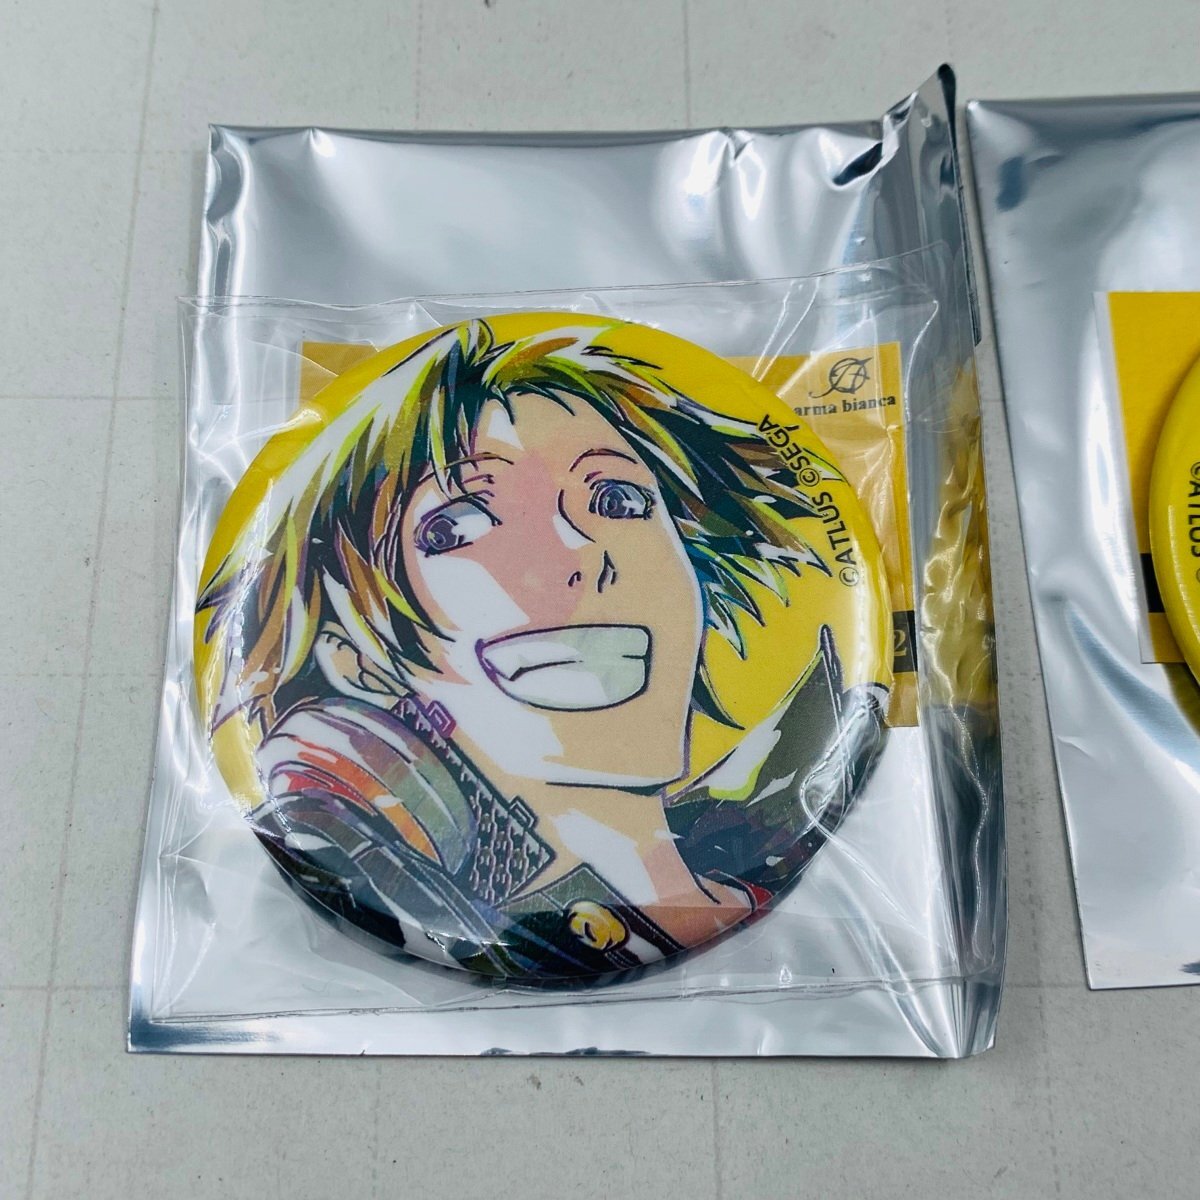  secondhand goods Persona 4 The * Golden P4G Ani-Art can badge vol.2. person .. on . flower ...2 kind set 